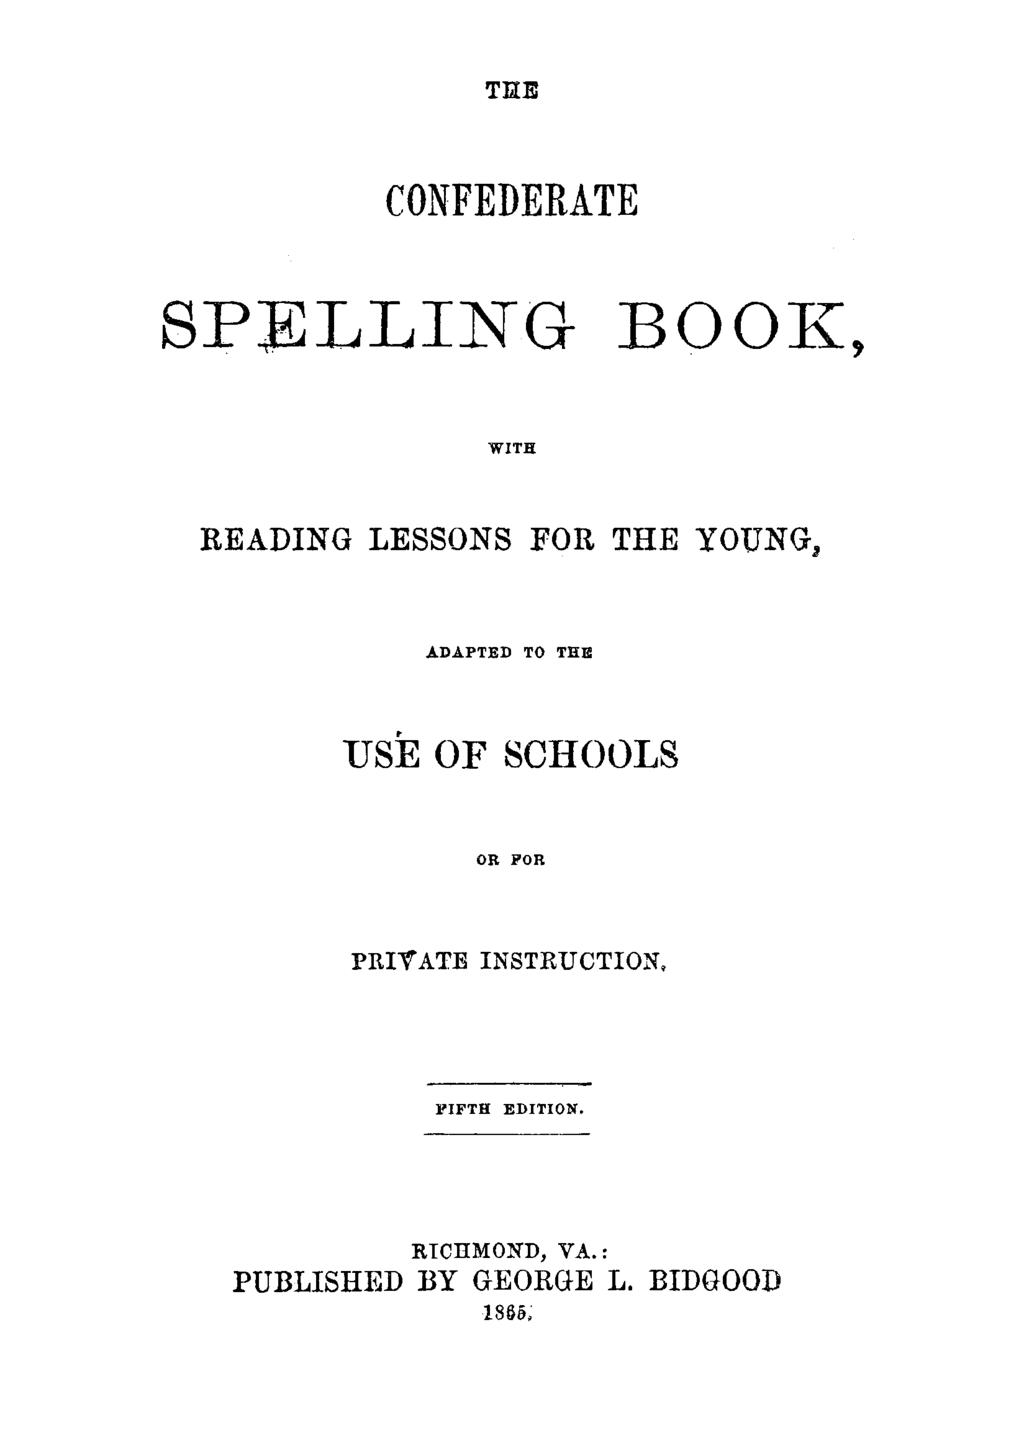 THE CONFEDERATE SPELLING BOOK, WITH READING LESSONS FOR THE YOUNG, ADAPTED TO THE USE OF